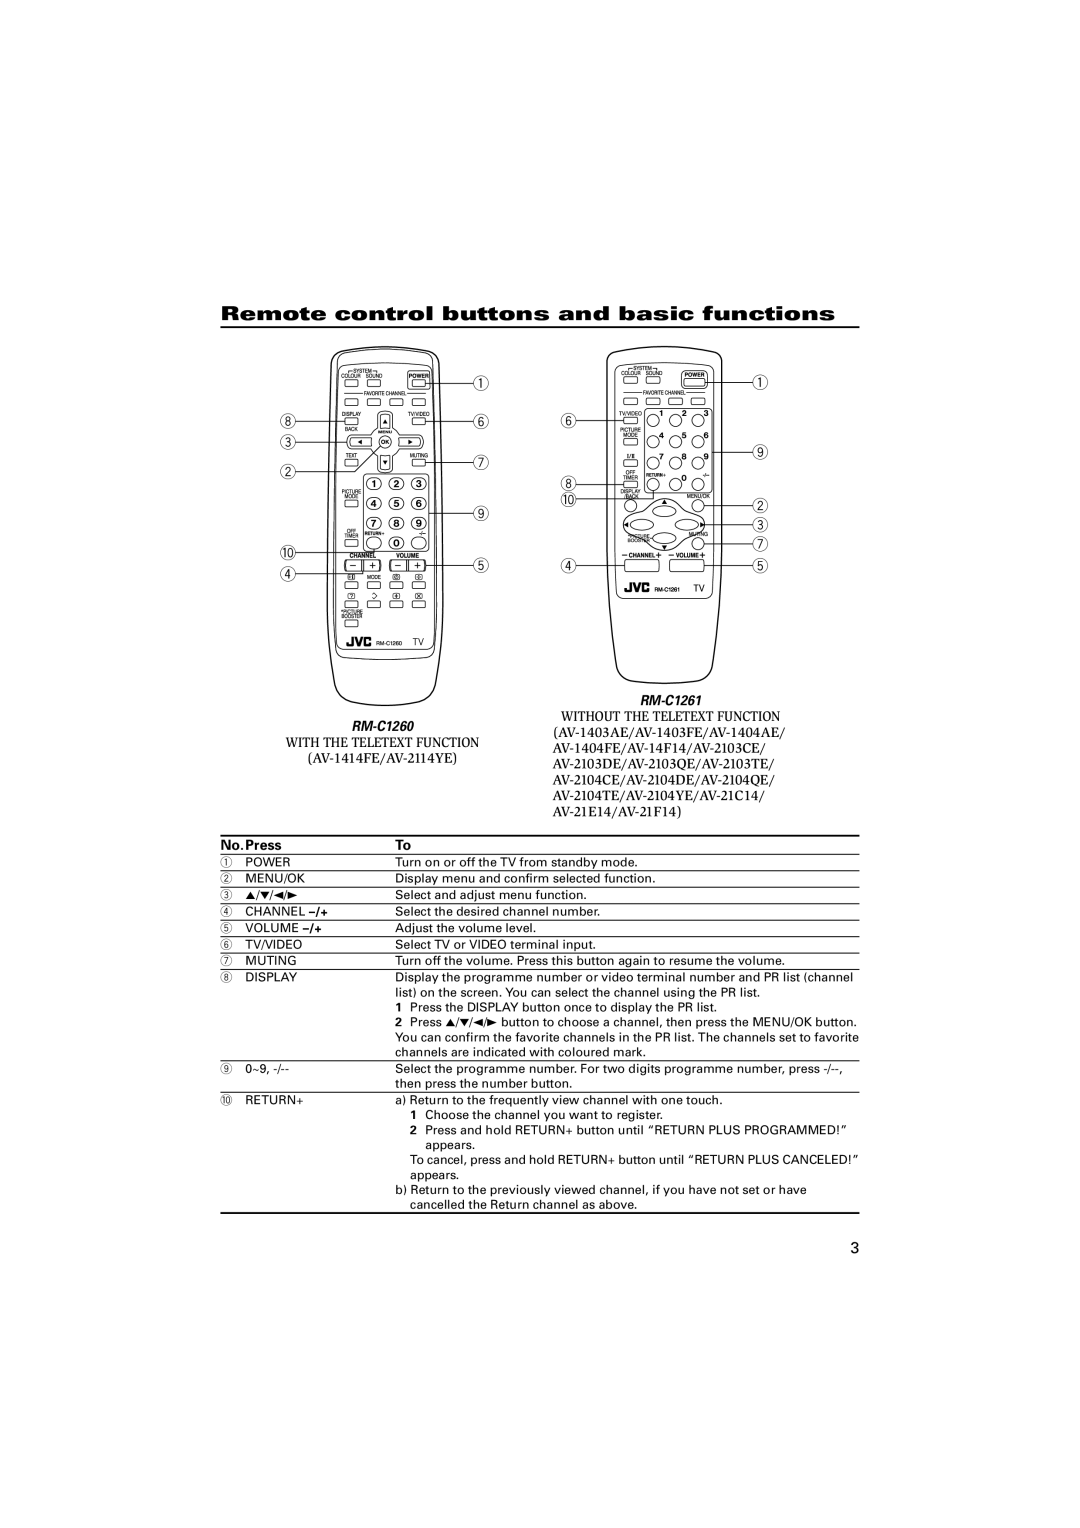 JVC specifications Remote control buttons and basic functions, RM-C1260, RM-C1261, No. Press 